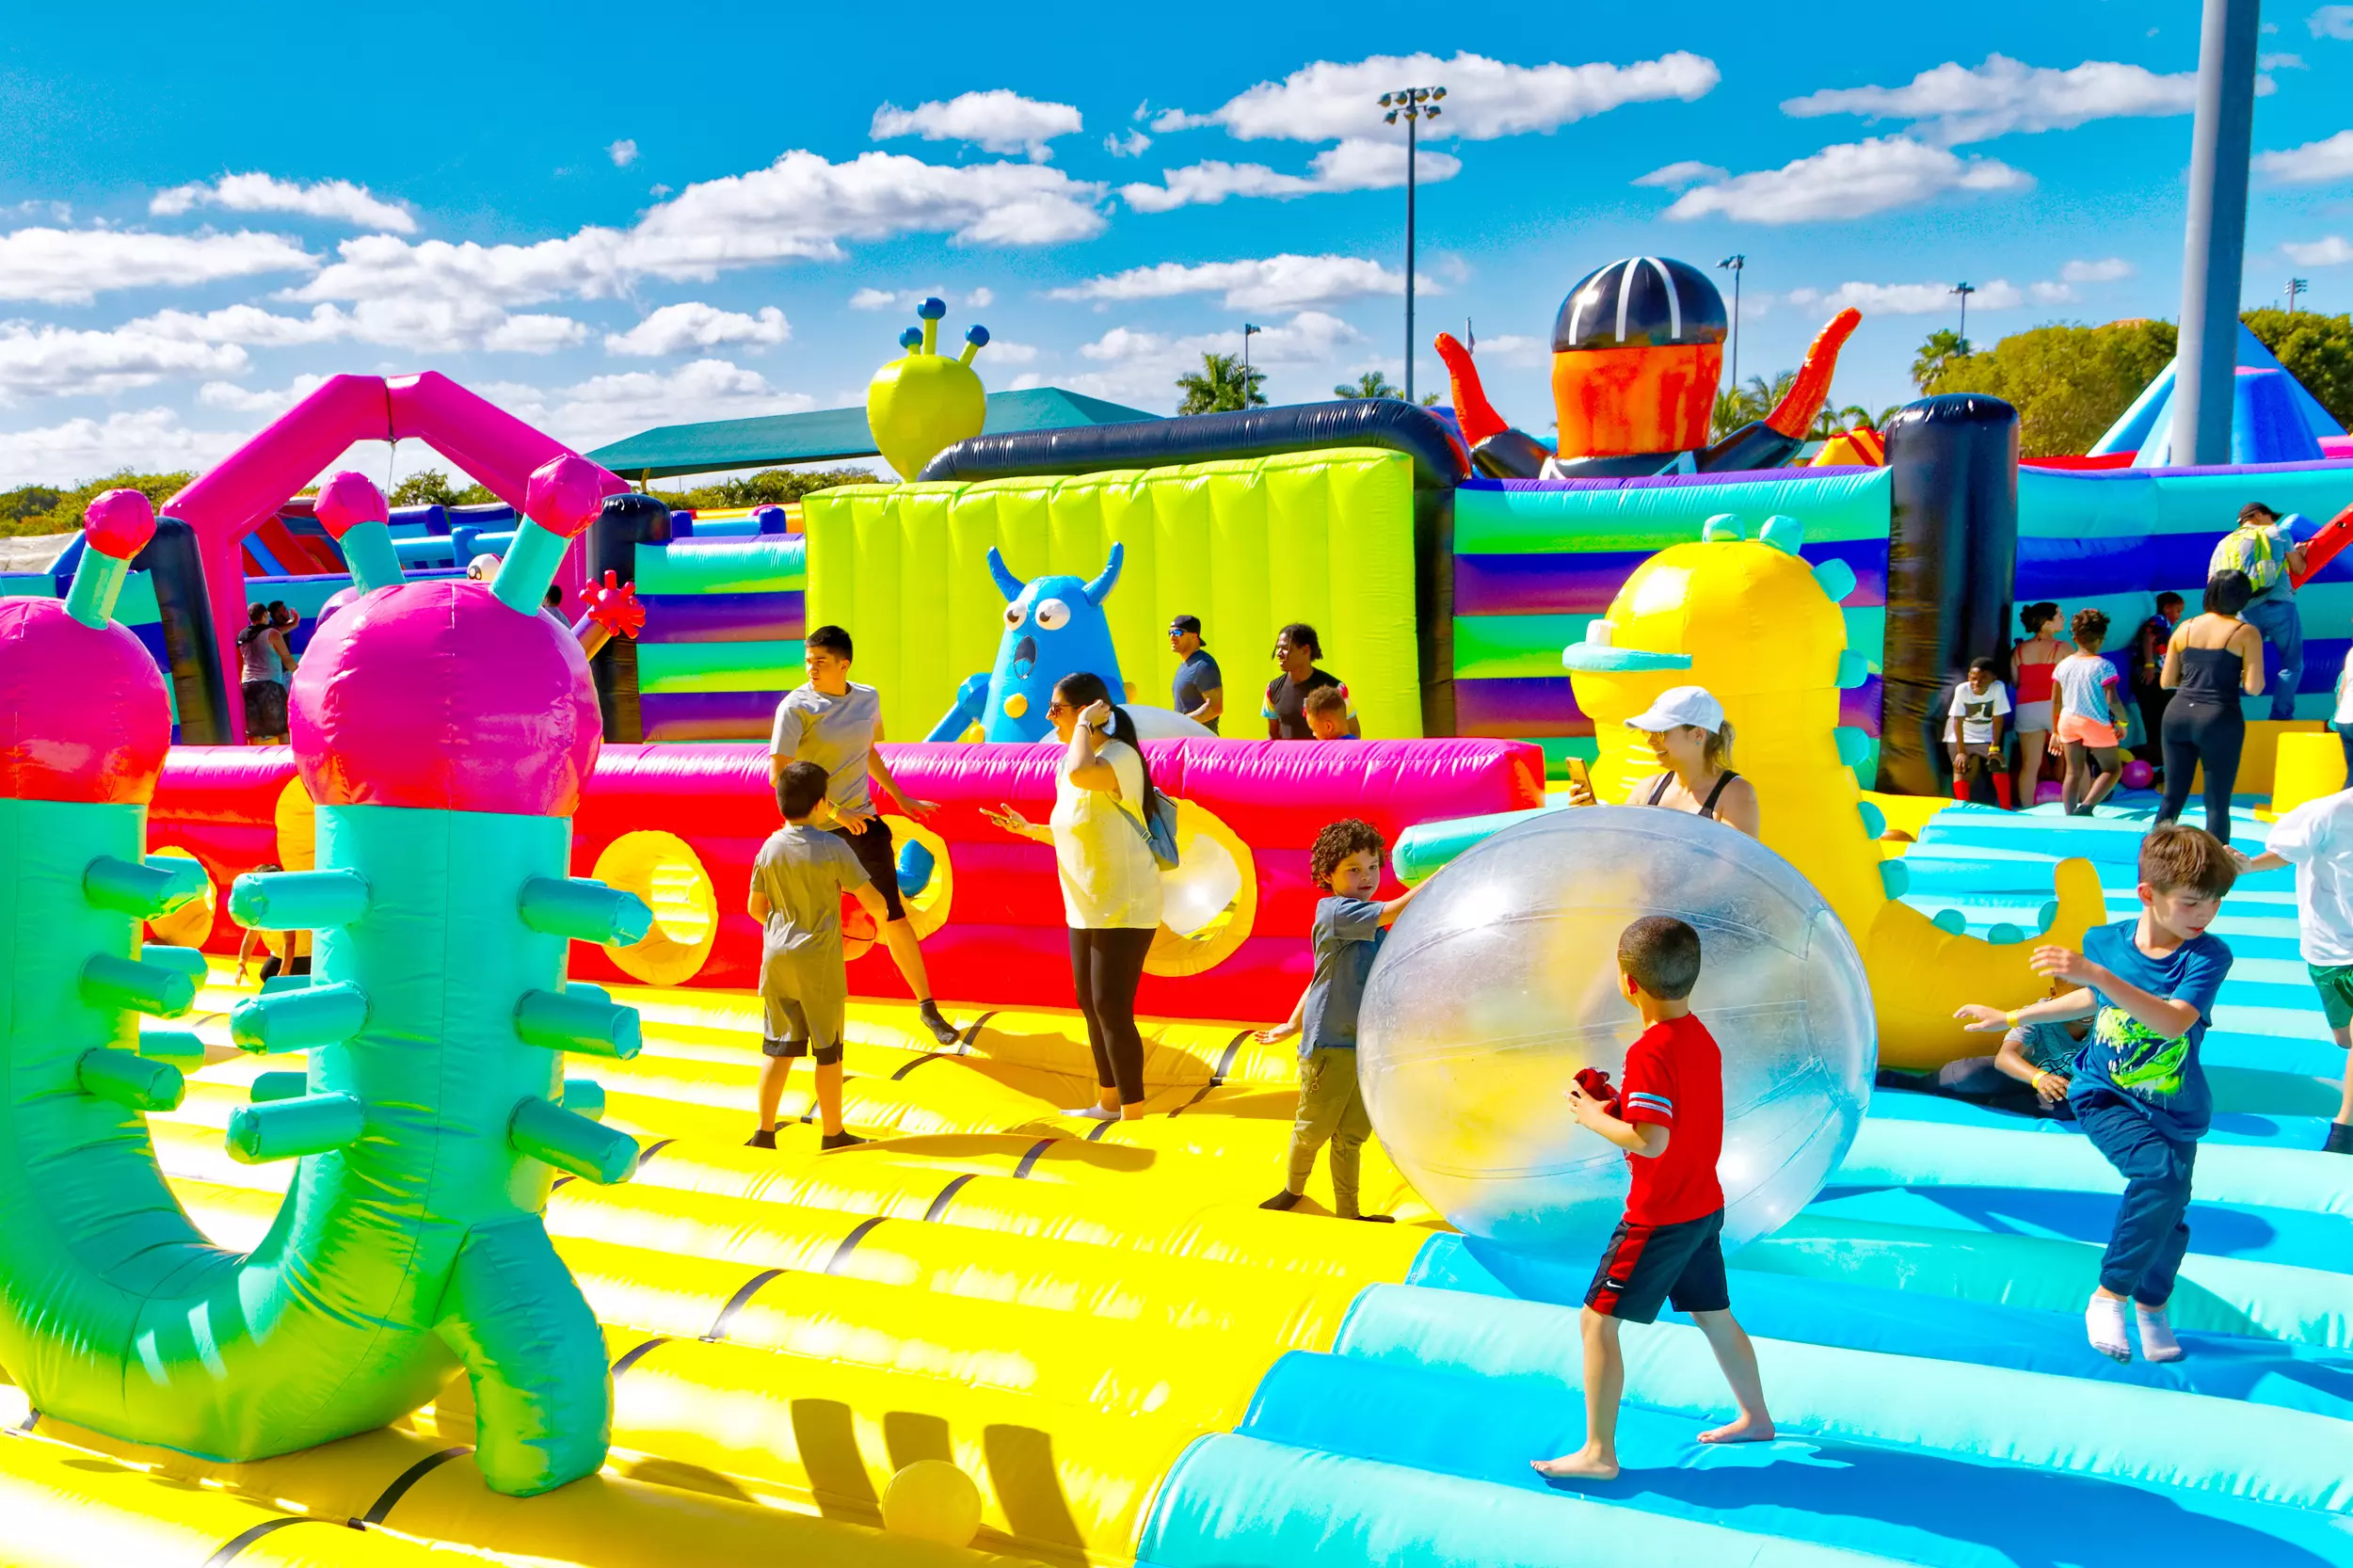 World's Biggest Bounce House Coming to NY For Inflatable Fun